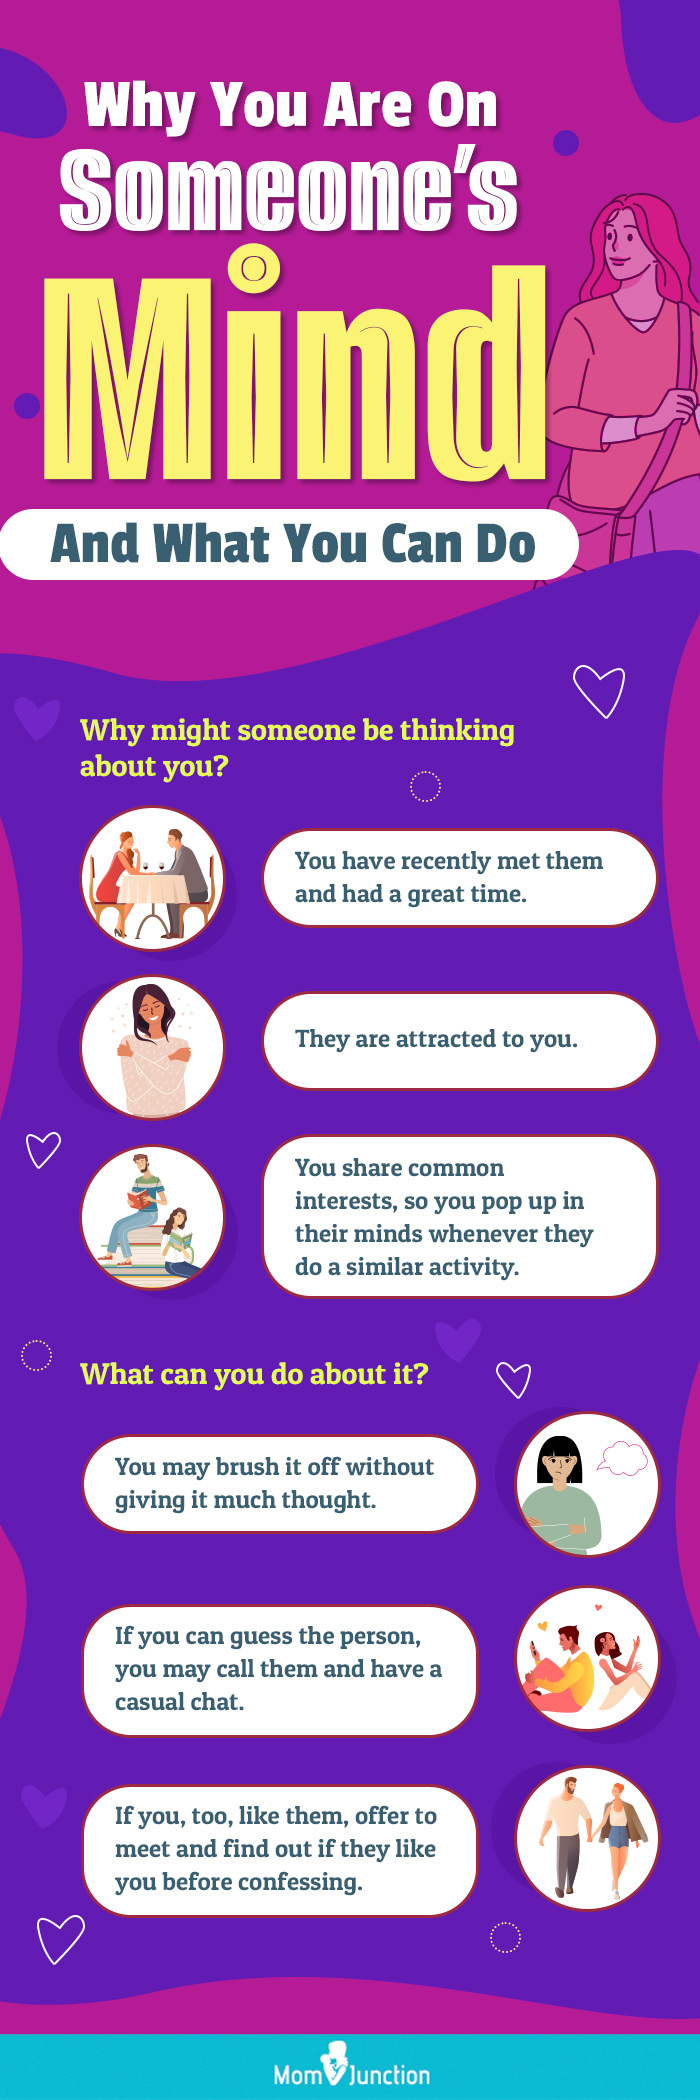 reasons they may be thinking about you (infographic)